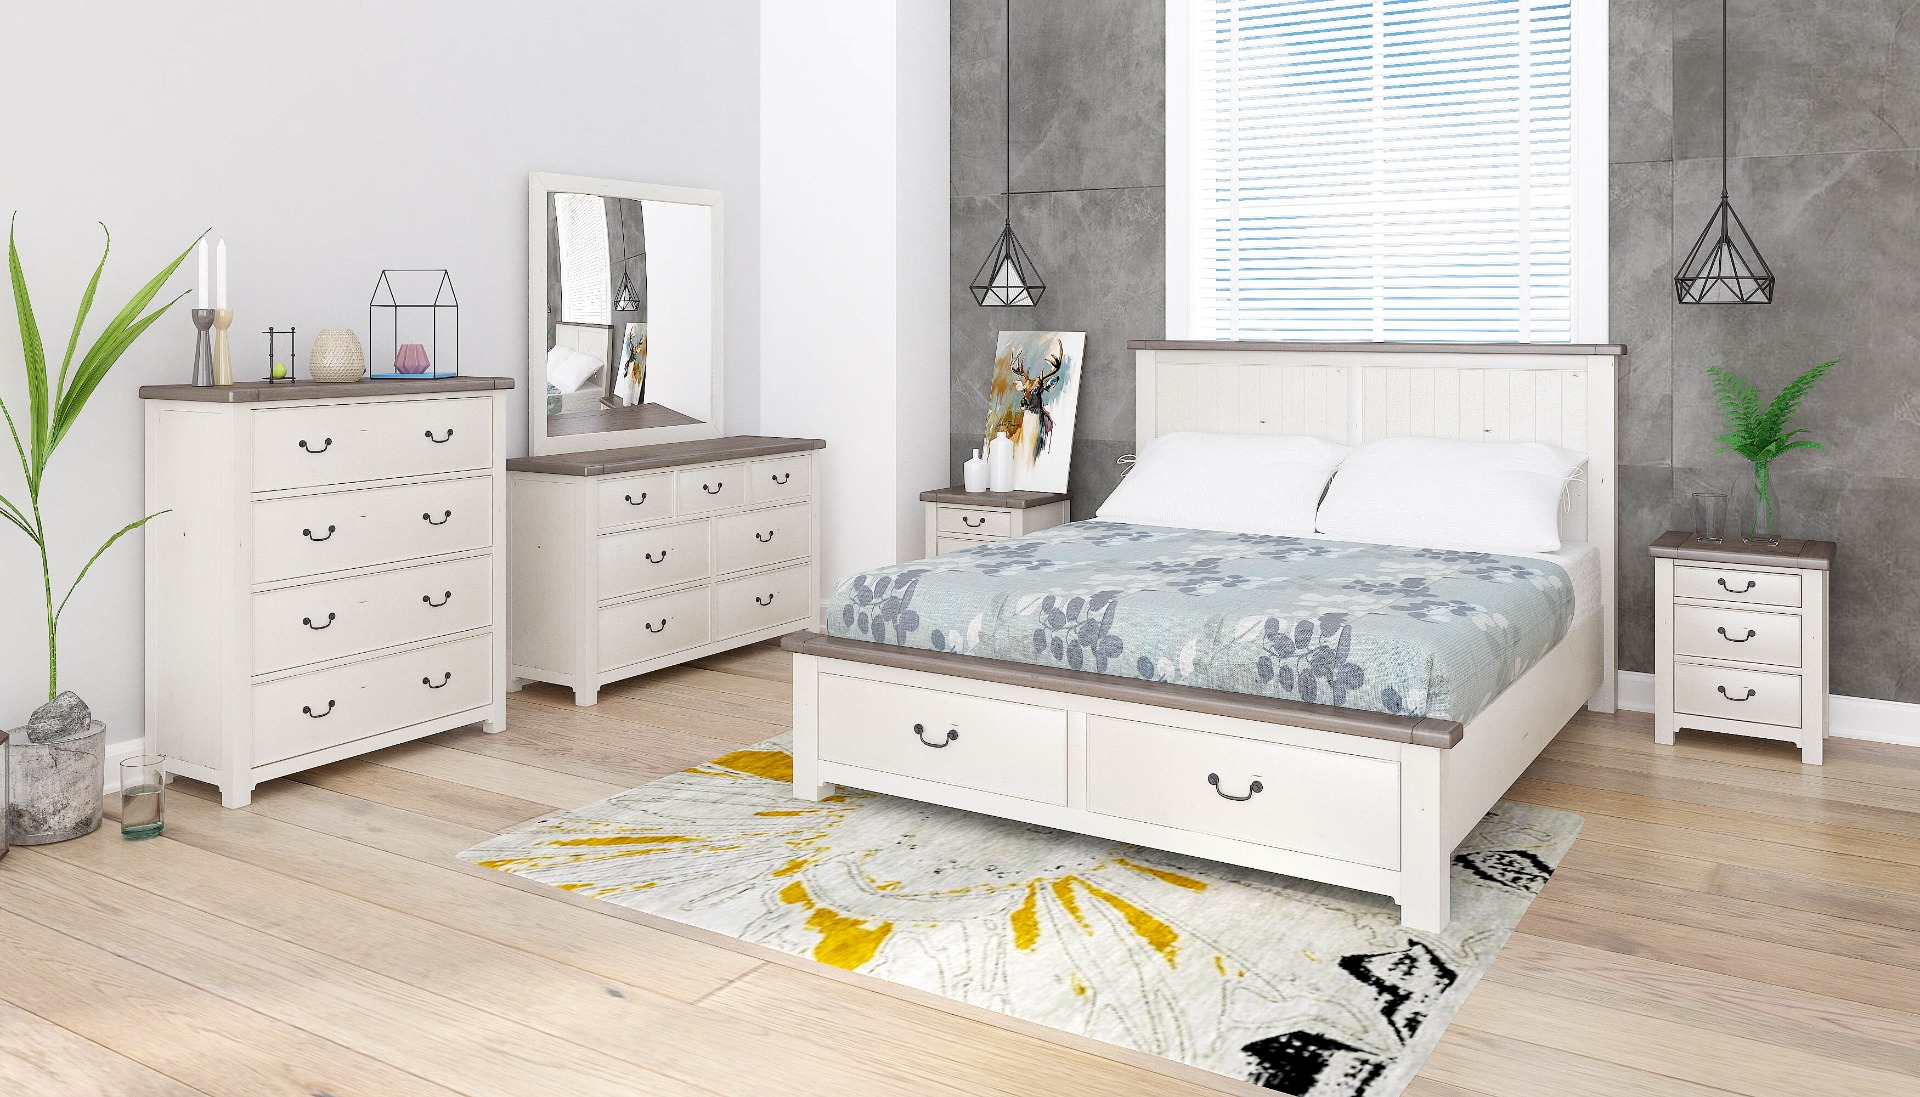 See Bedroom and Bathroom Stock Categories